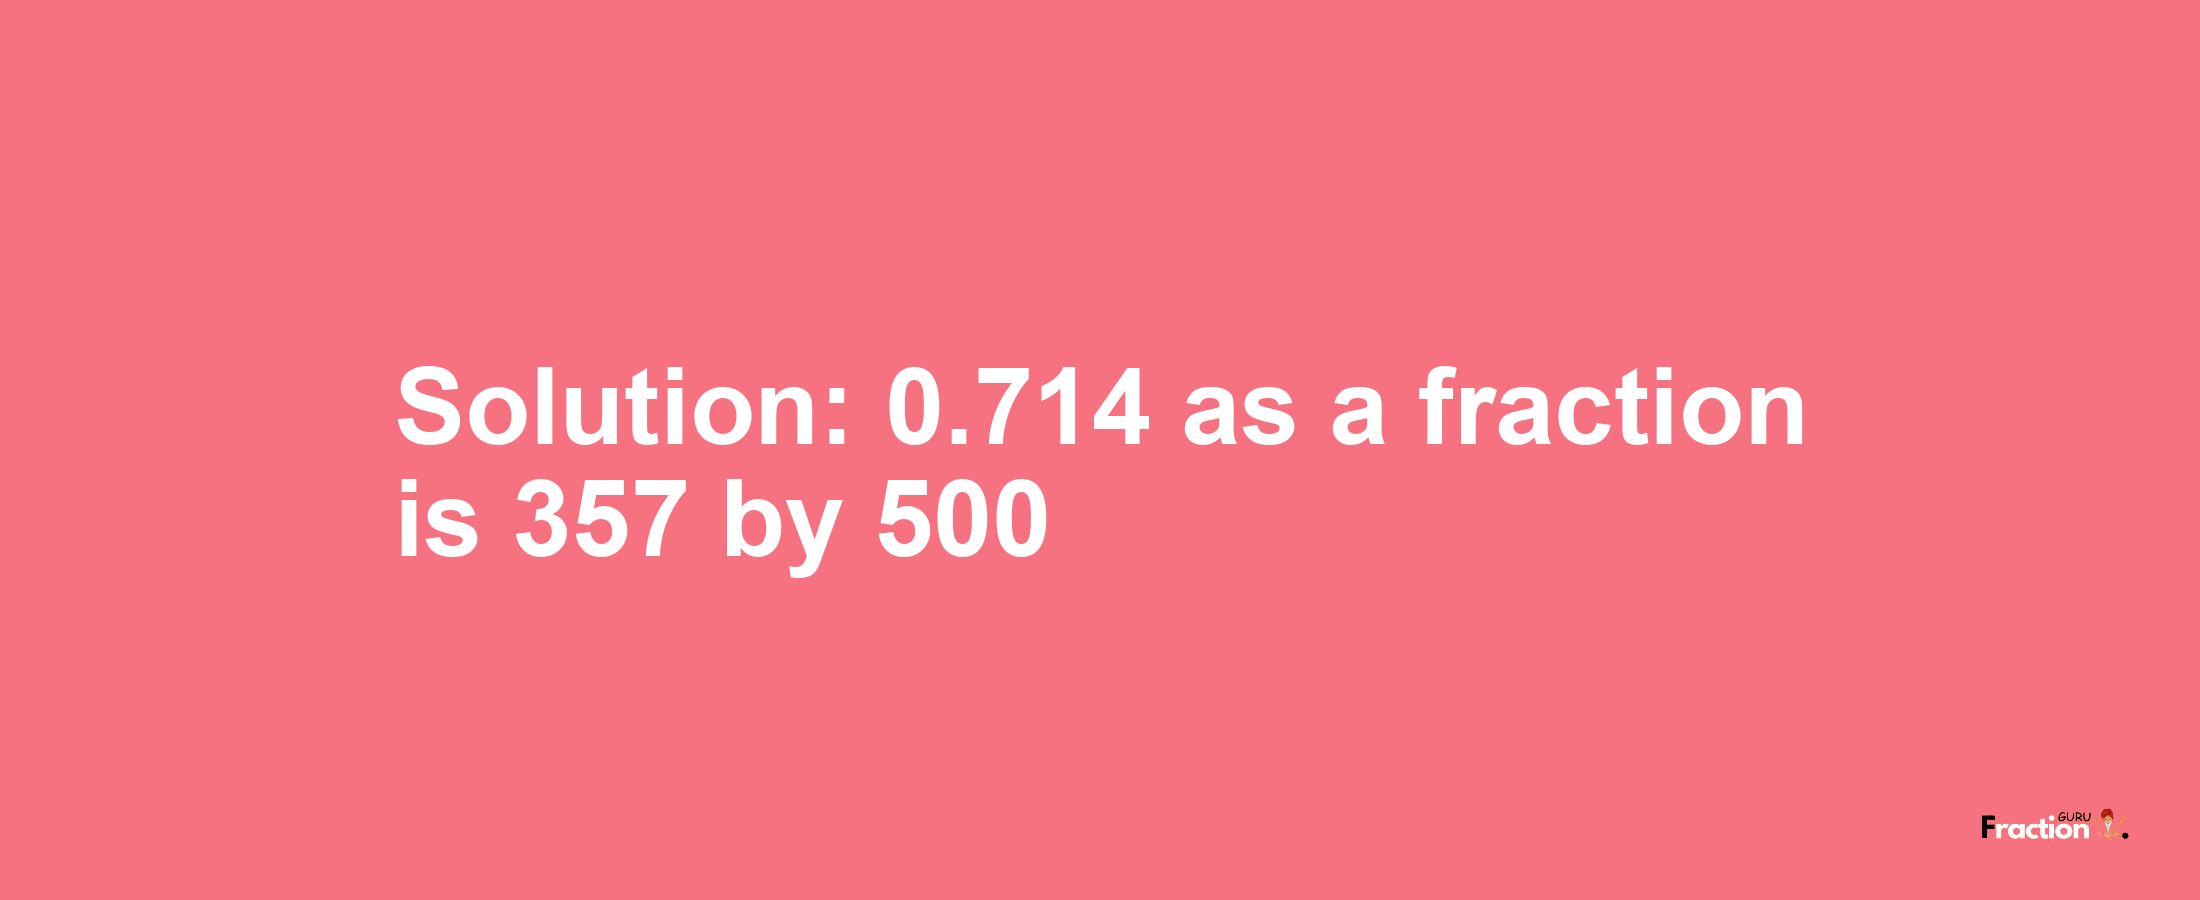 Solution:0.714 as a fraction is 357/500